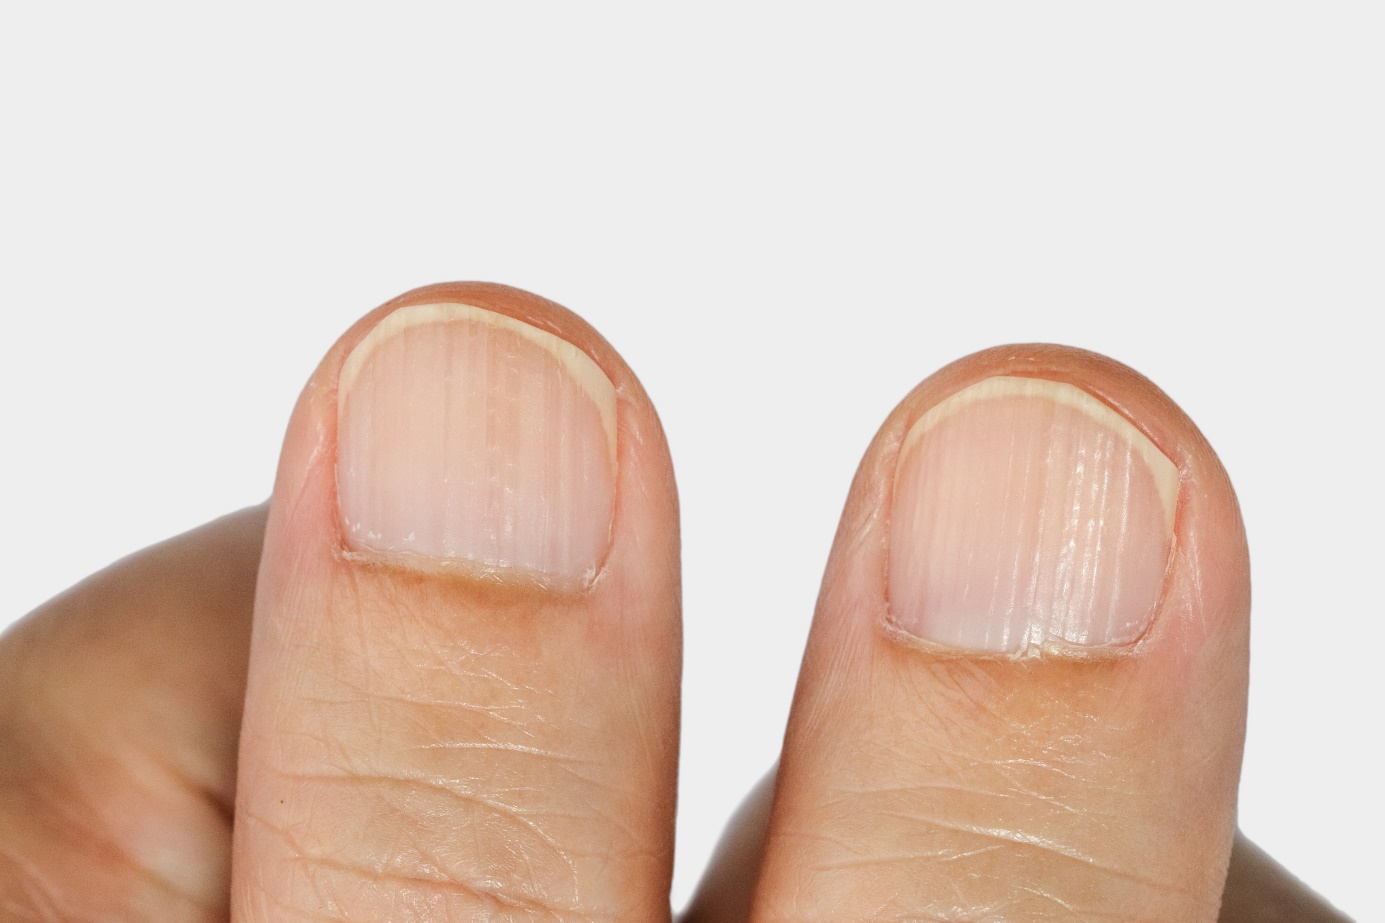 Vertical grooves on nails - finger, nail and grooves